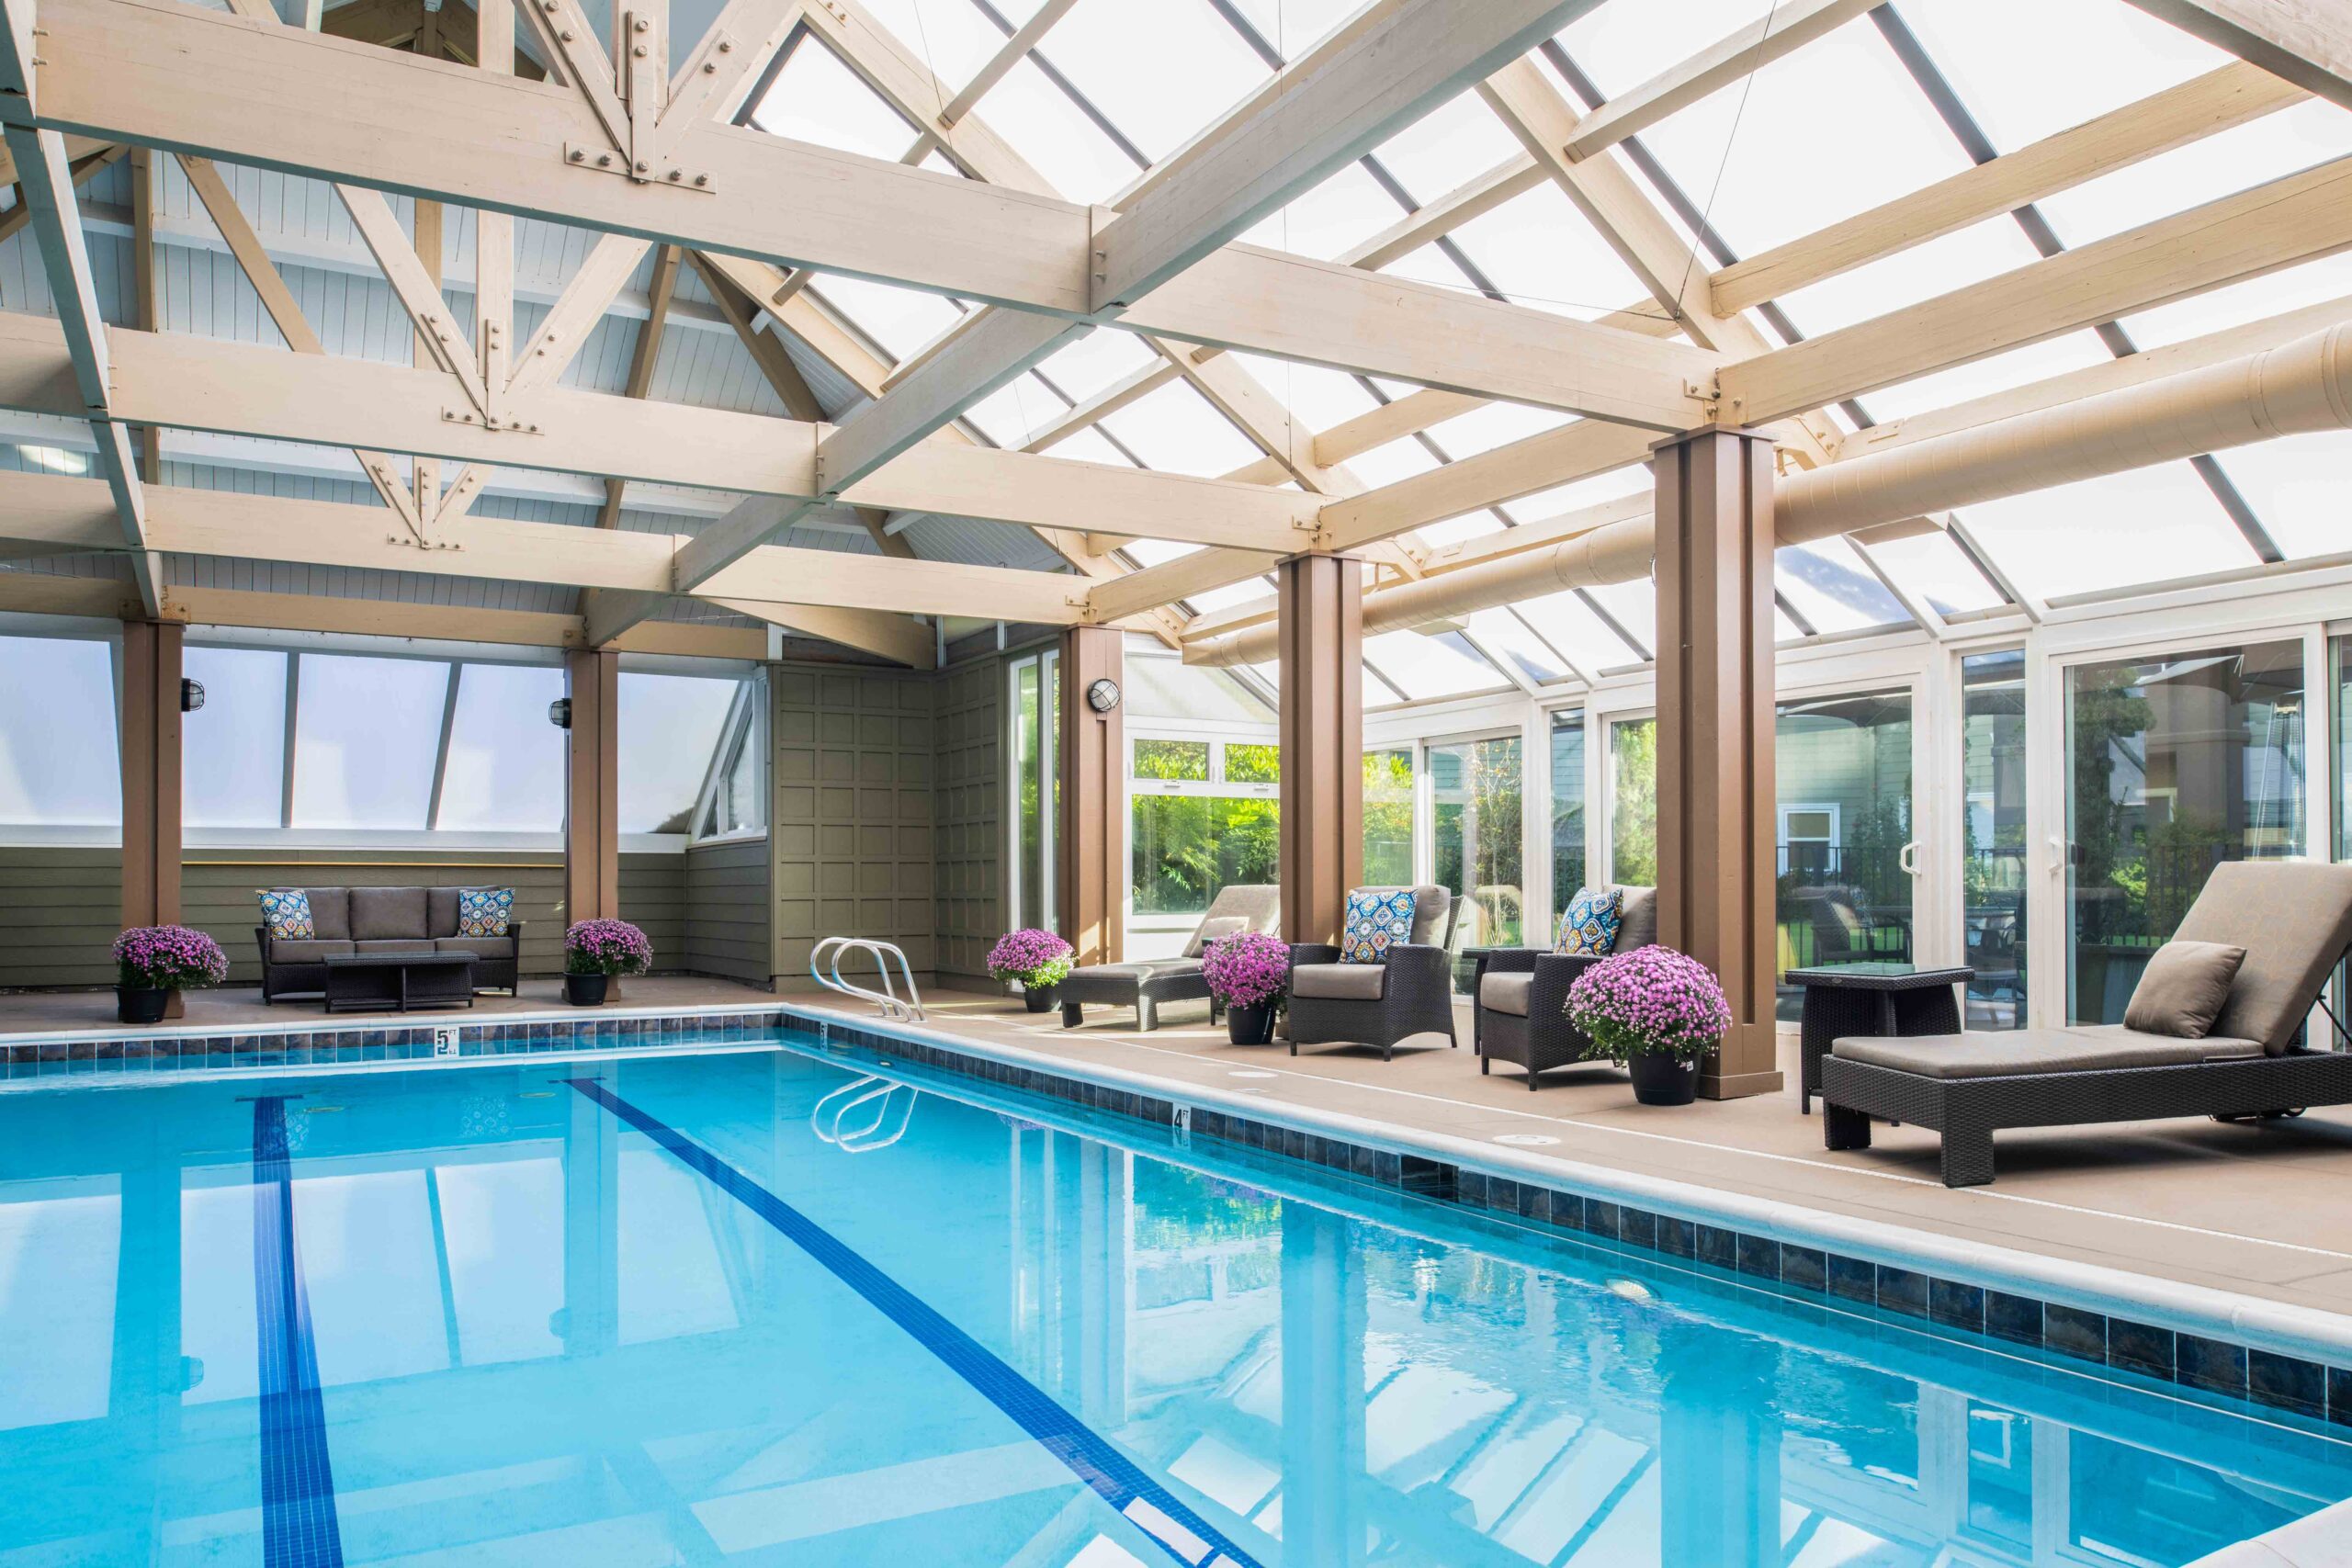 An indoor pool with a roof, providing a serene and sheltered environment for swimming and relaxation.